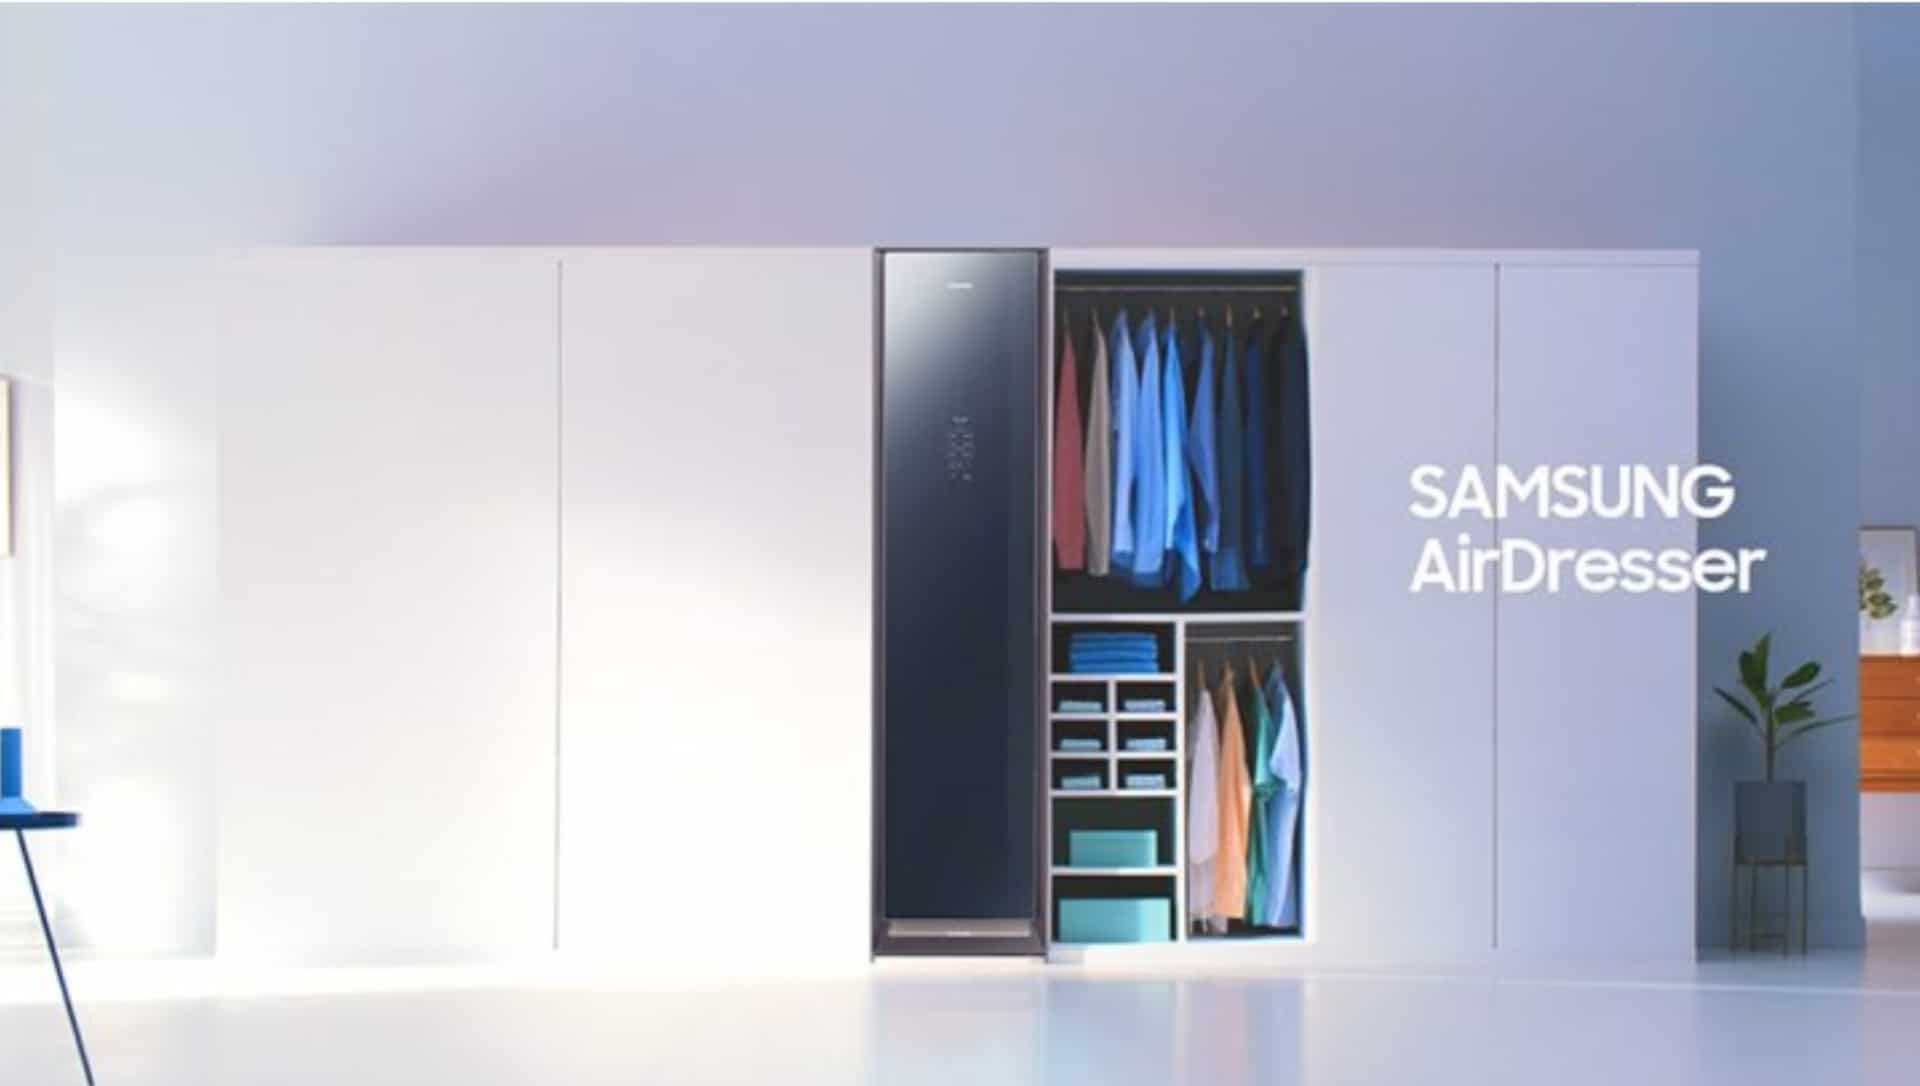 Samsung's Innovative AirDresser Reimagines and Delivers Clothing Care Like Never Before